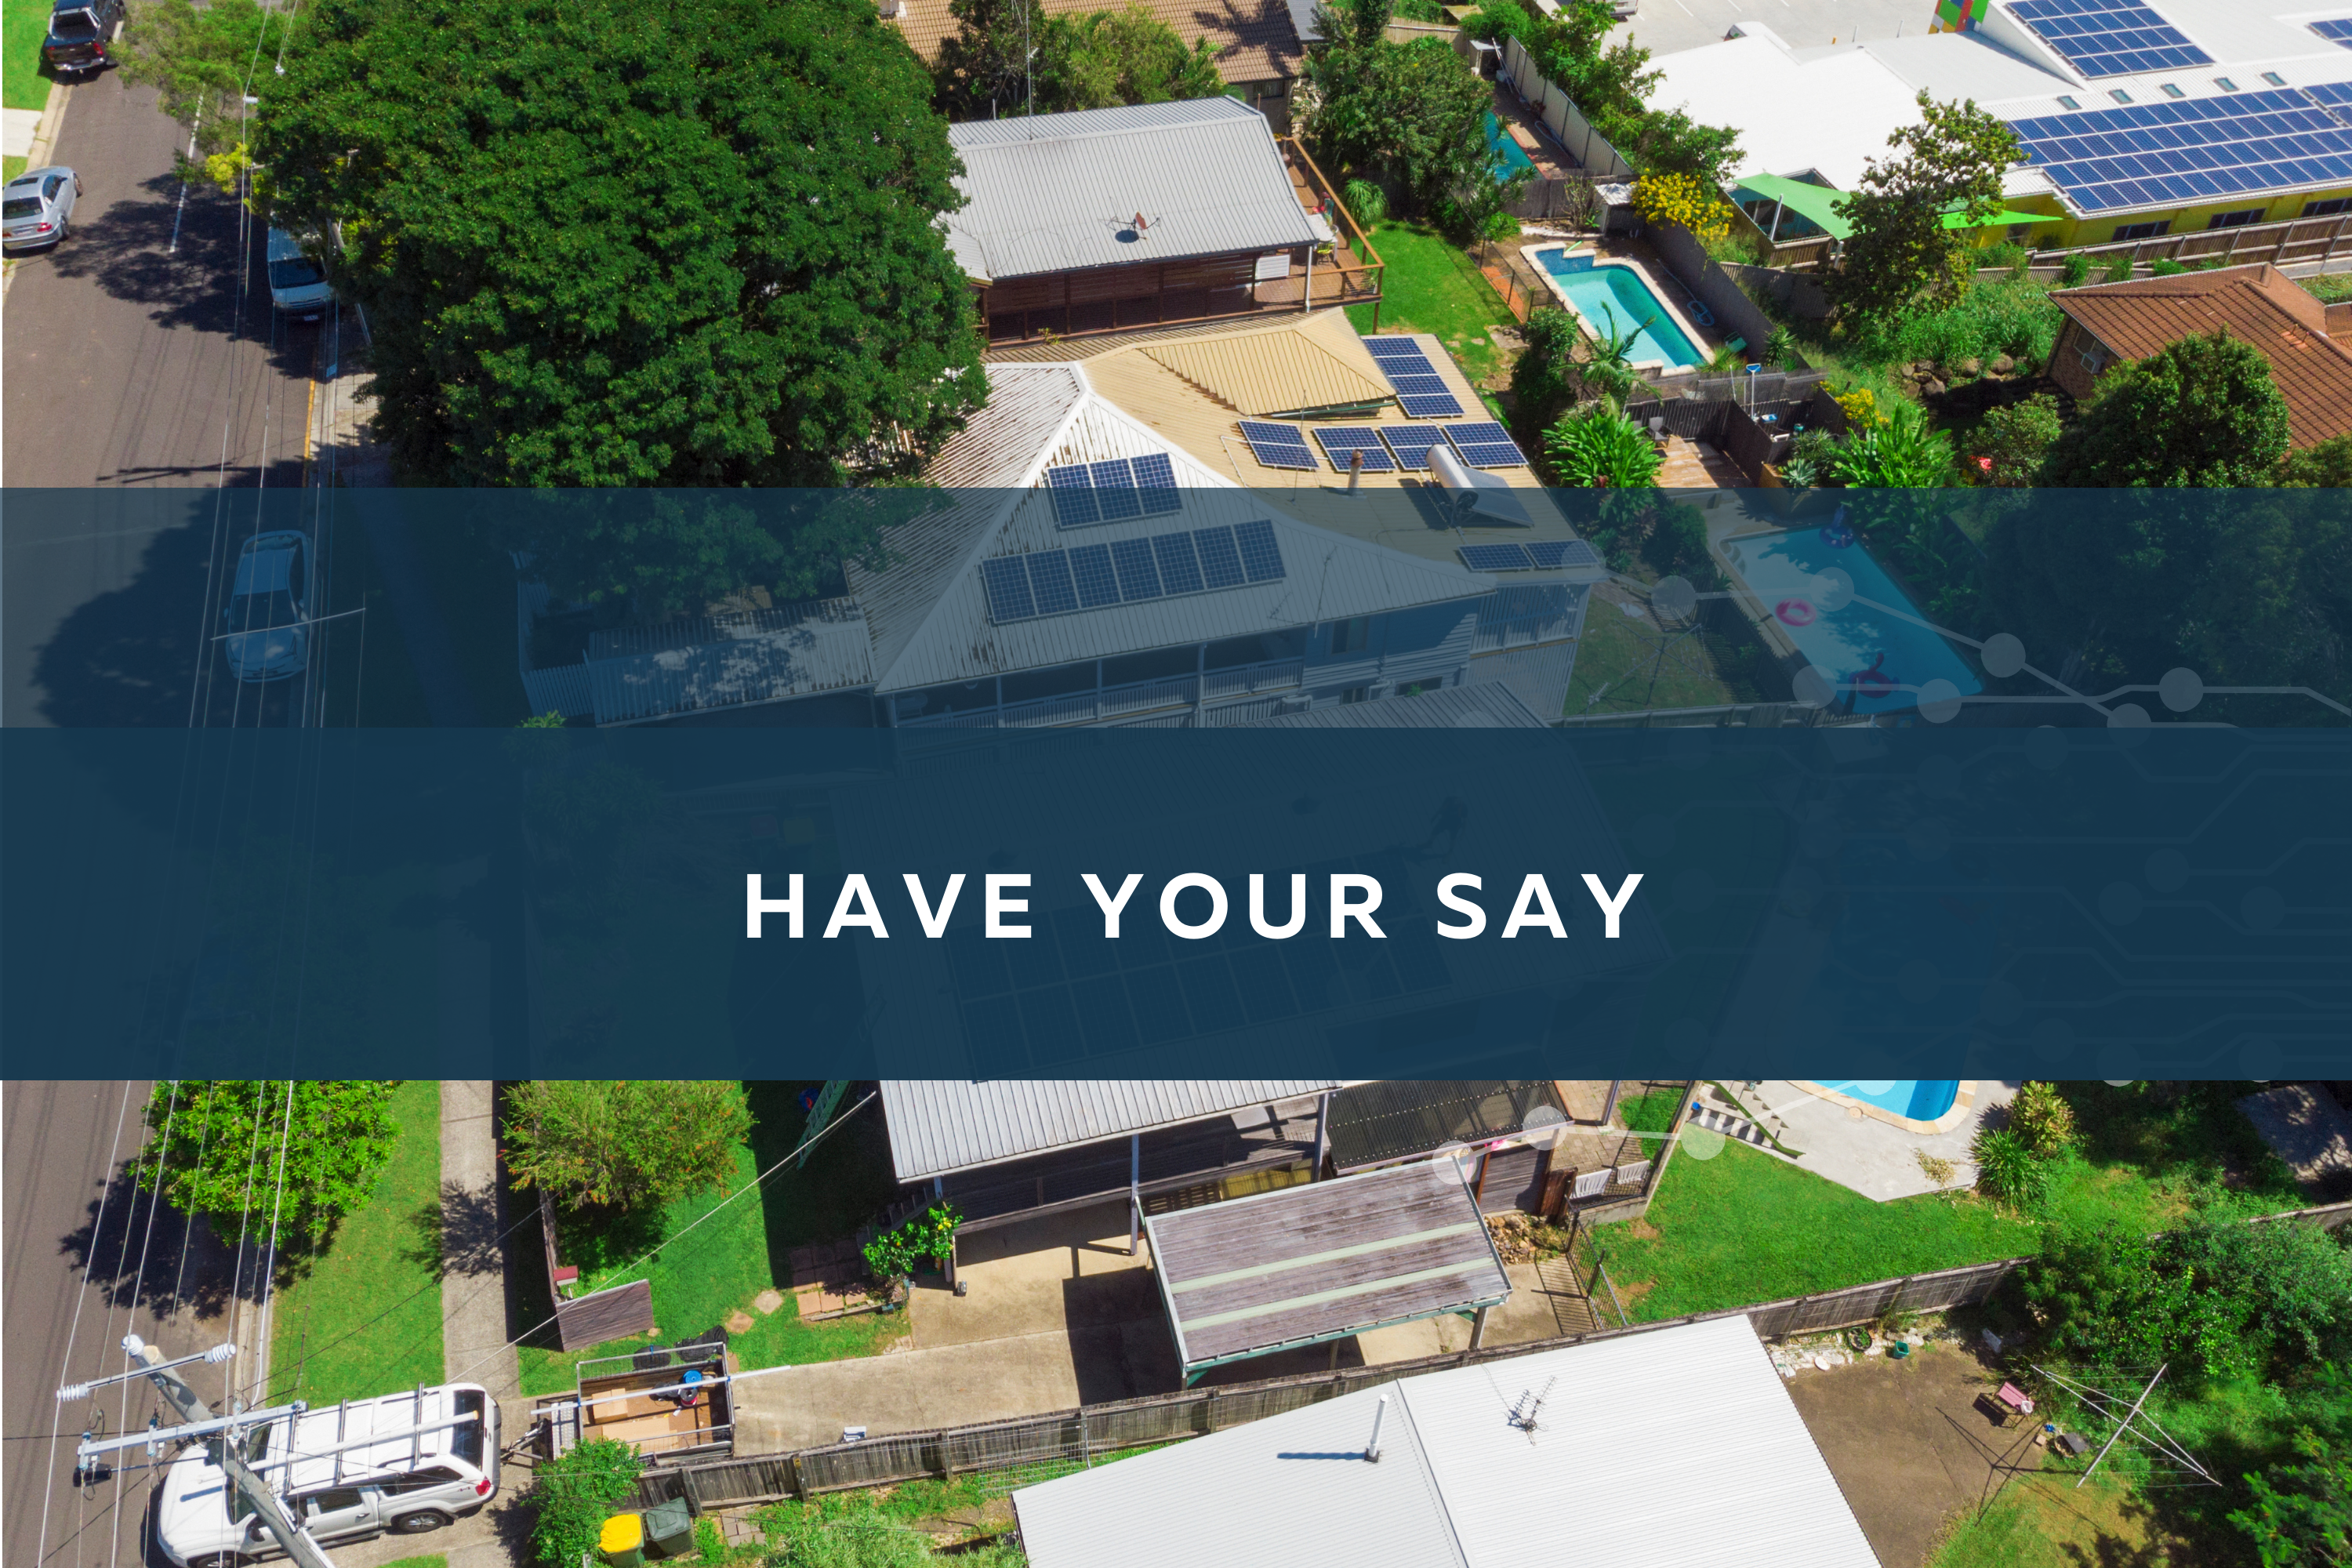 Have your say - Shape the energy of the future